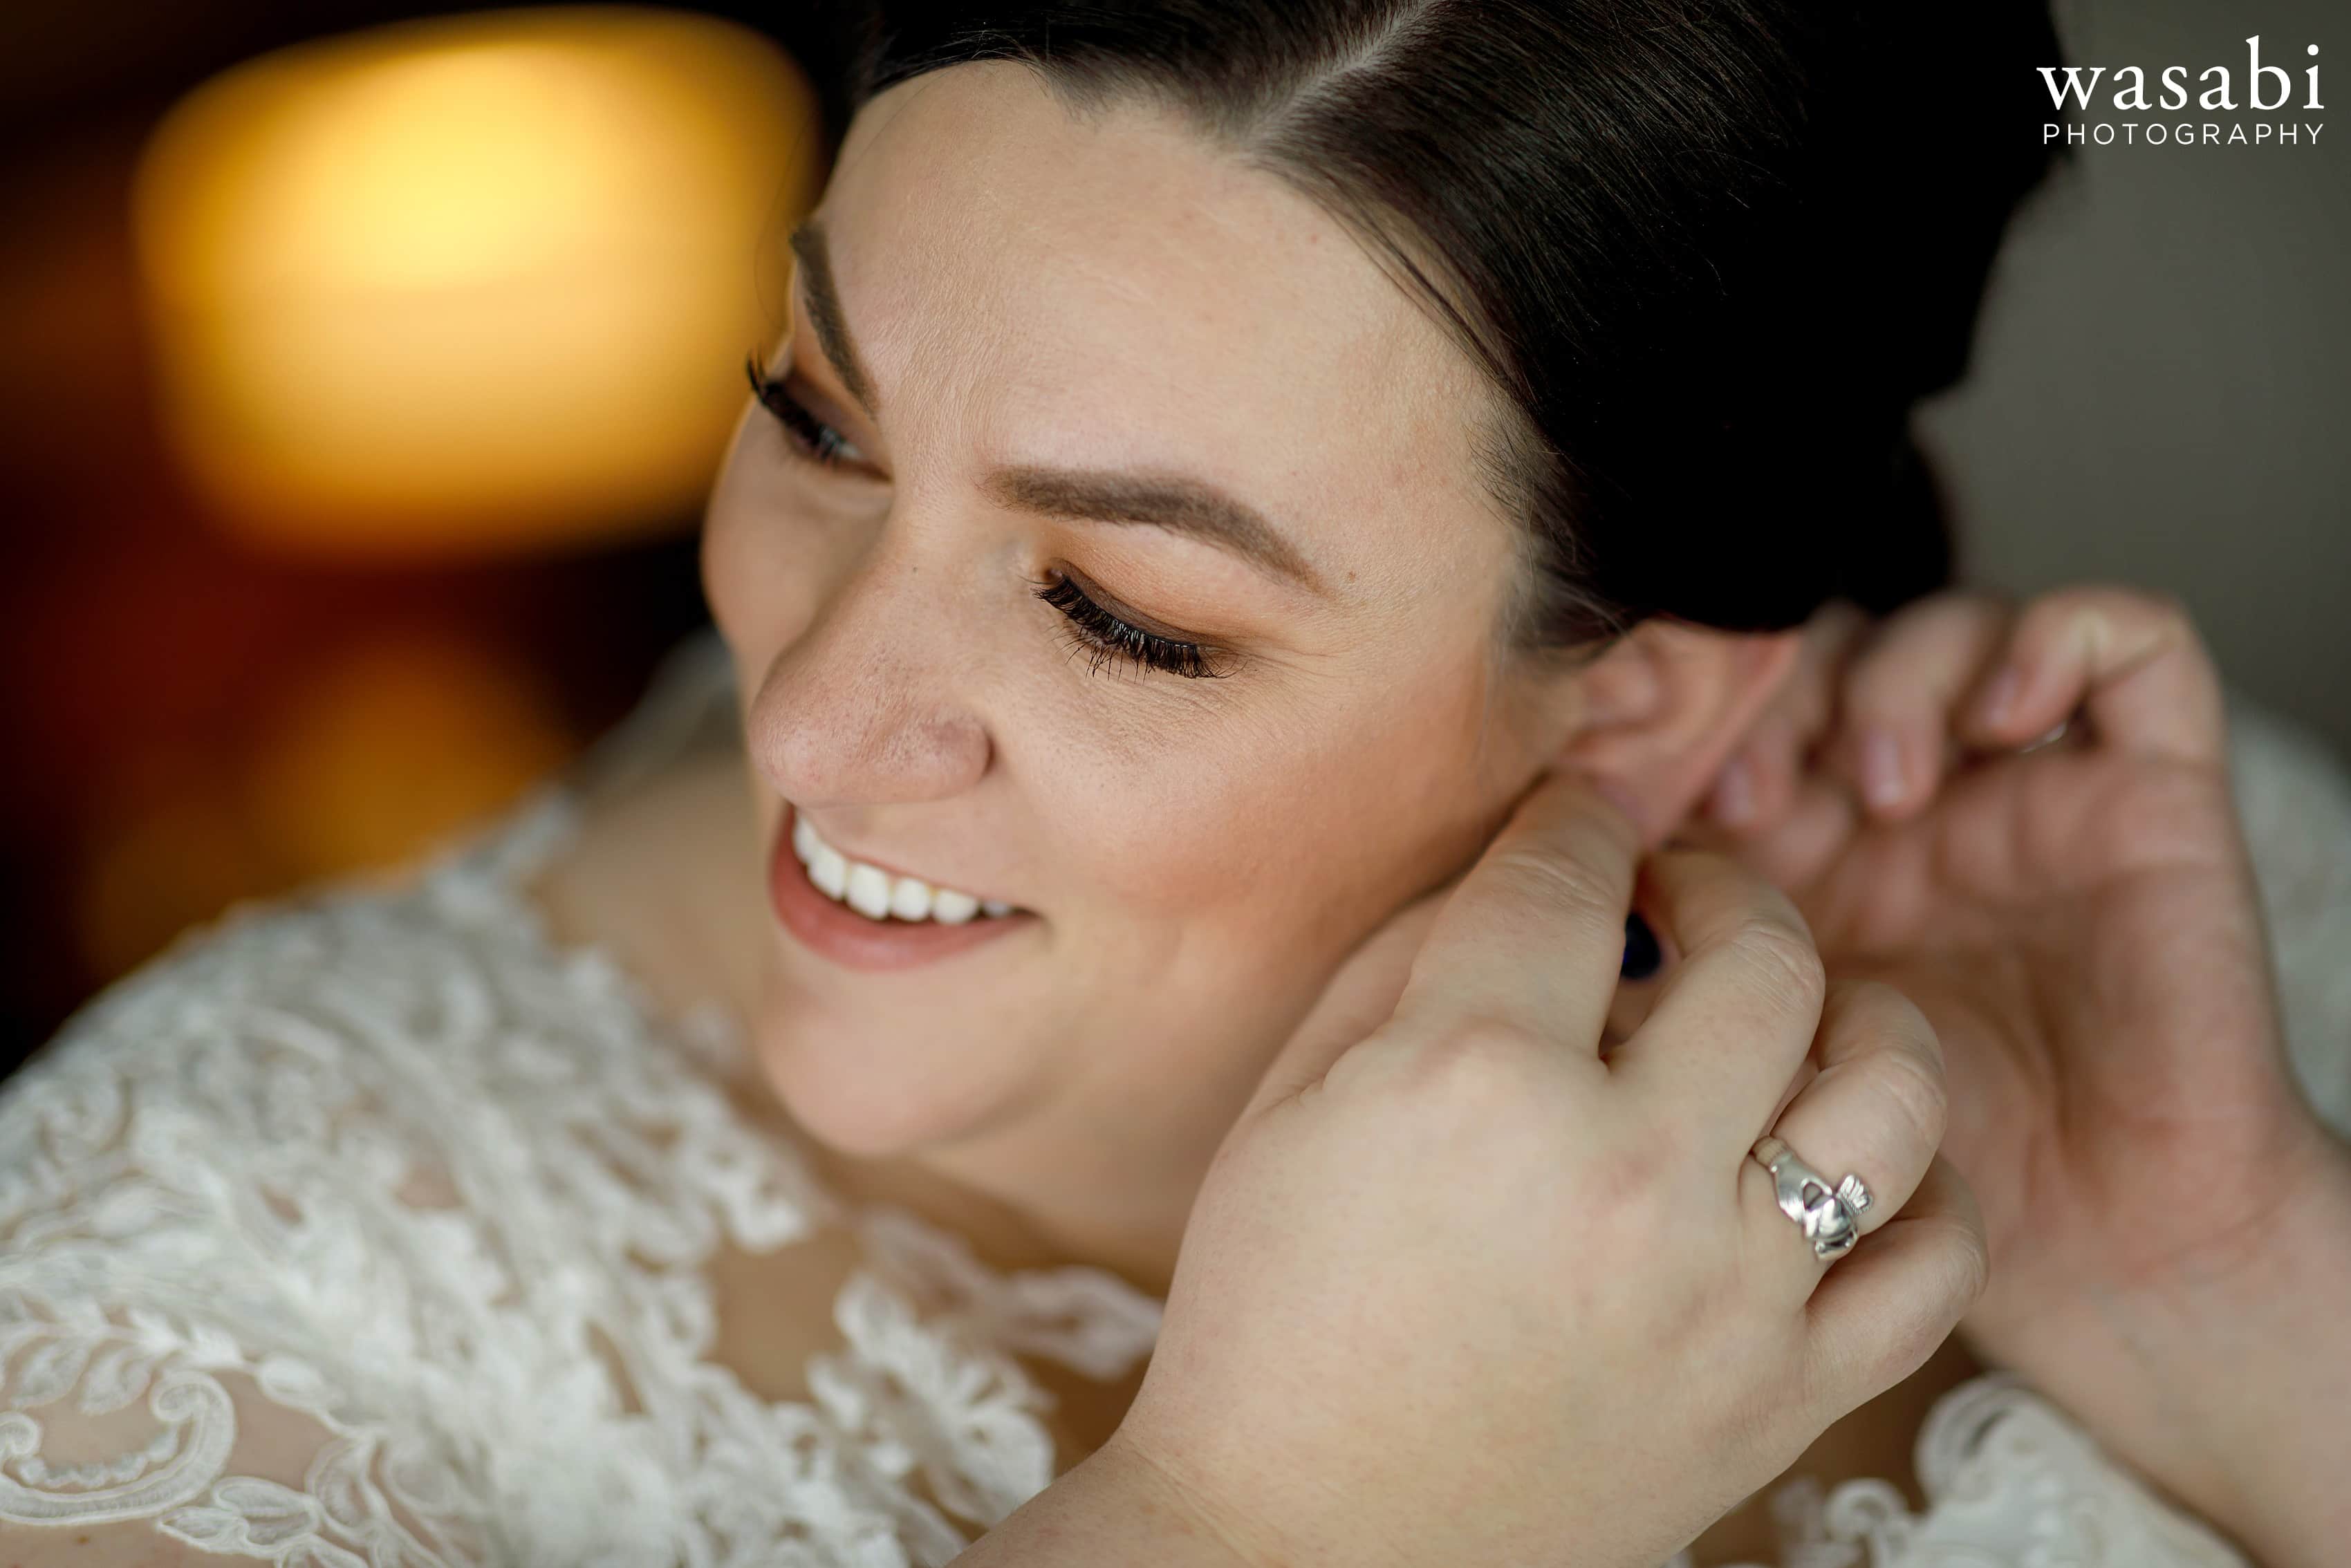 bride puts earring on while getting ready for wedding